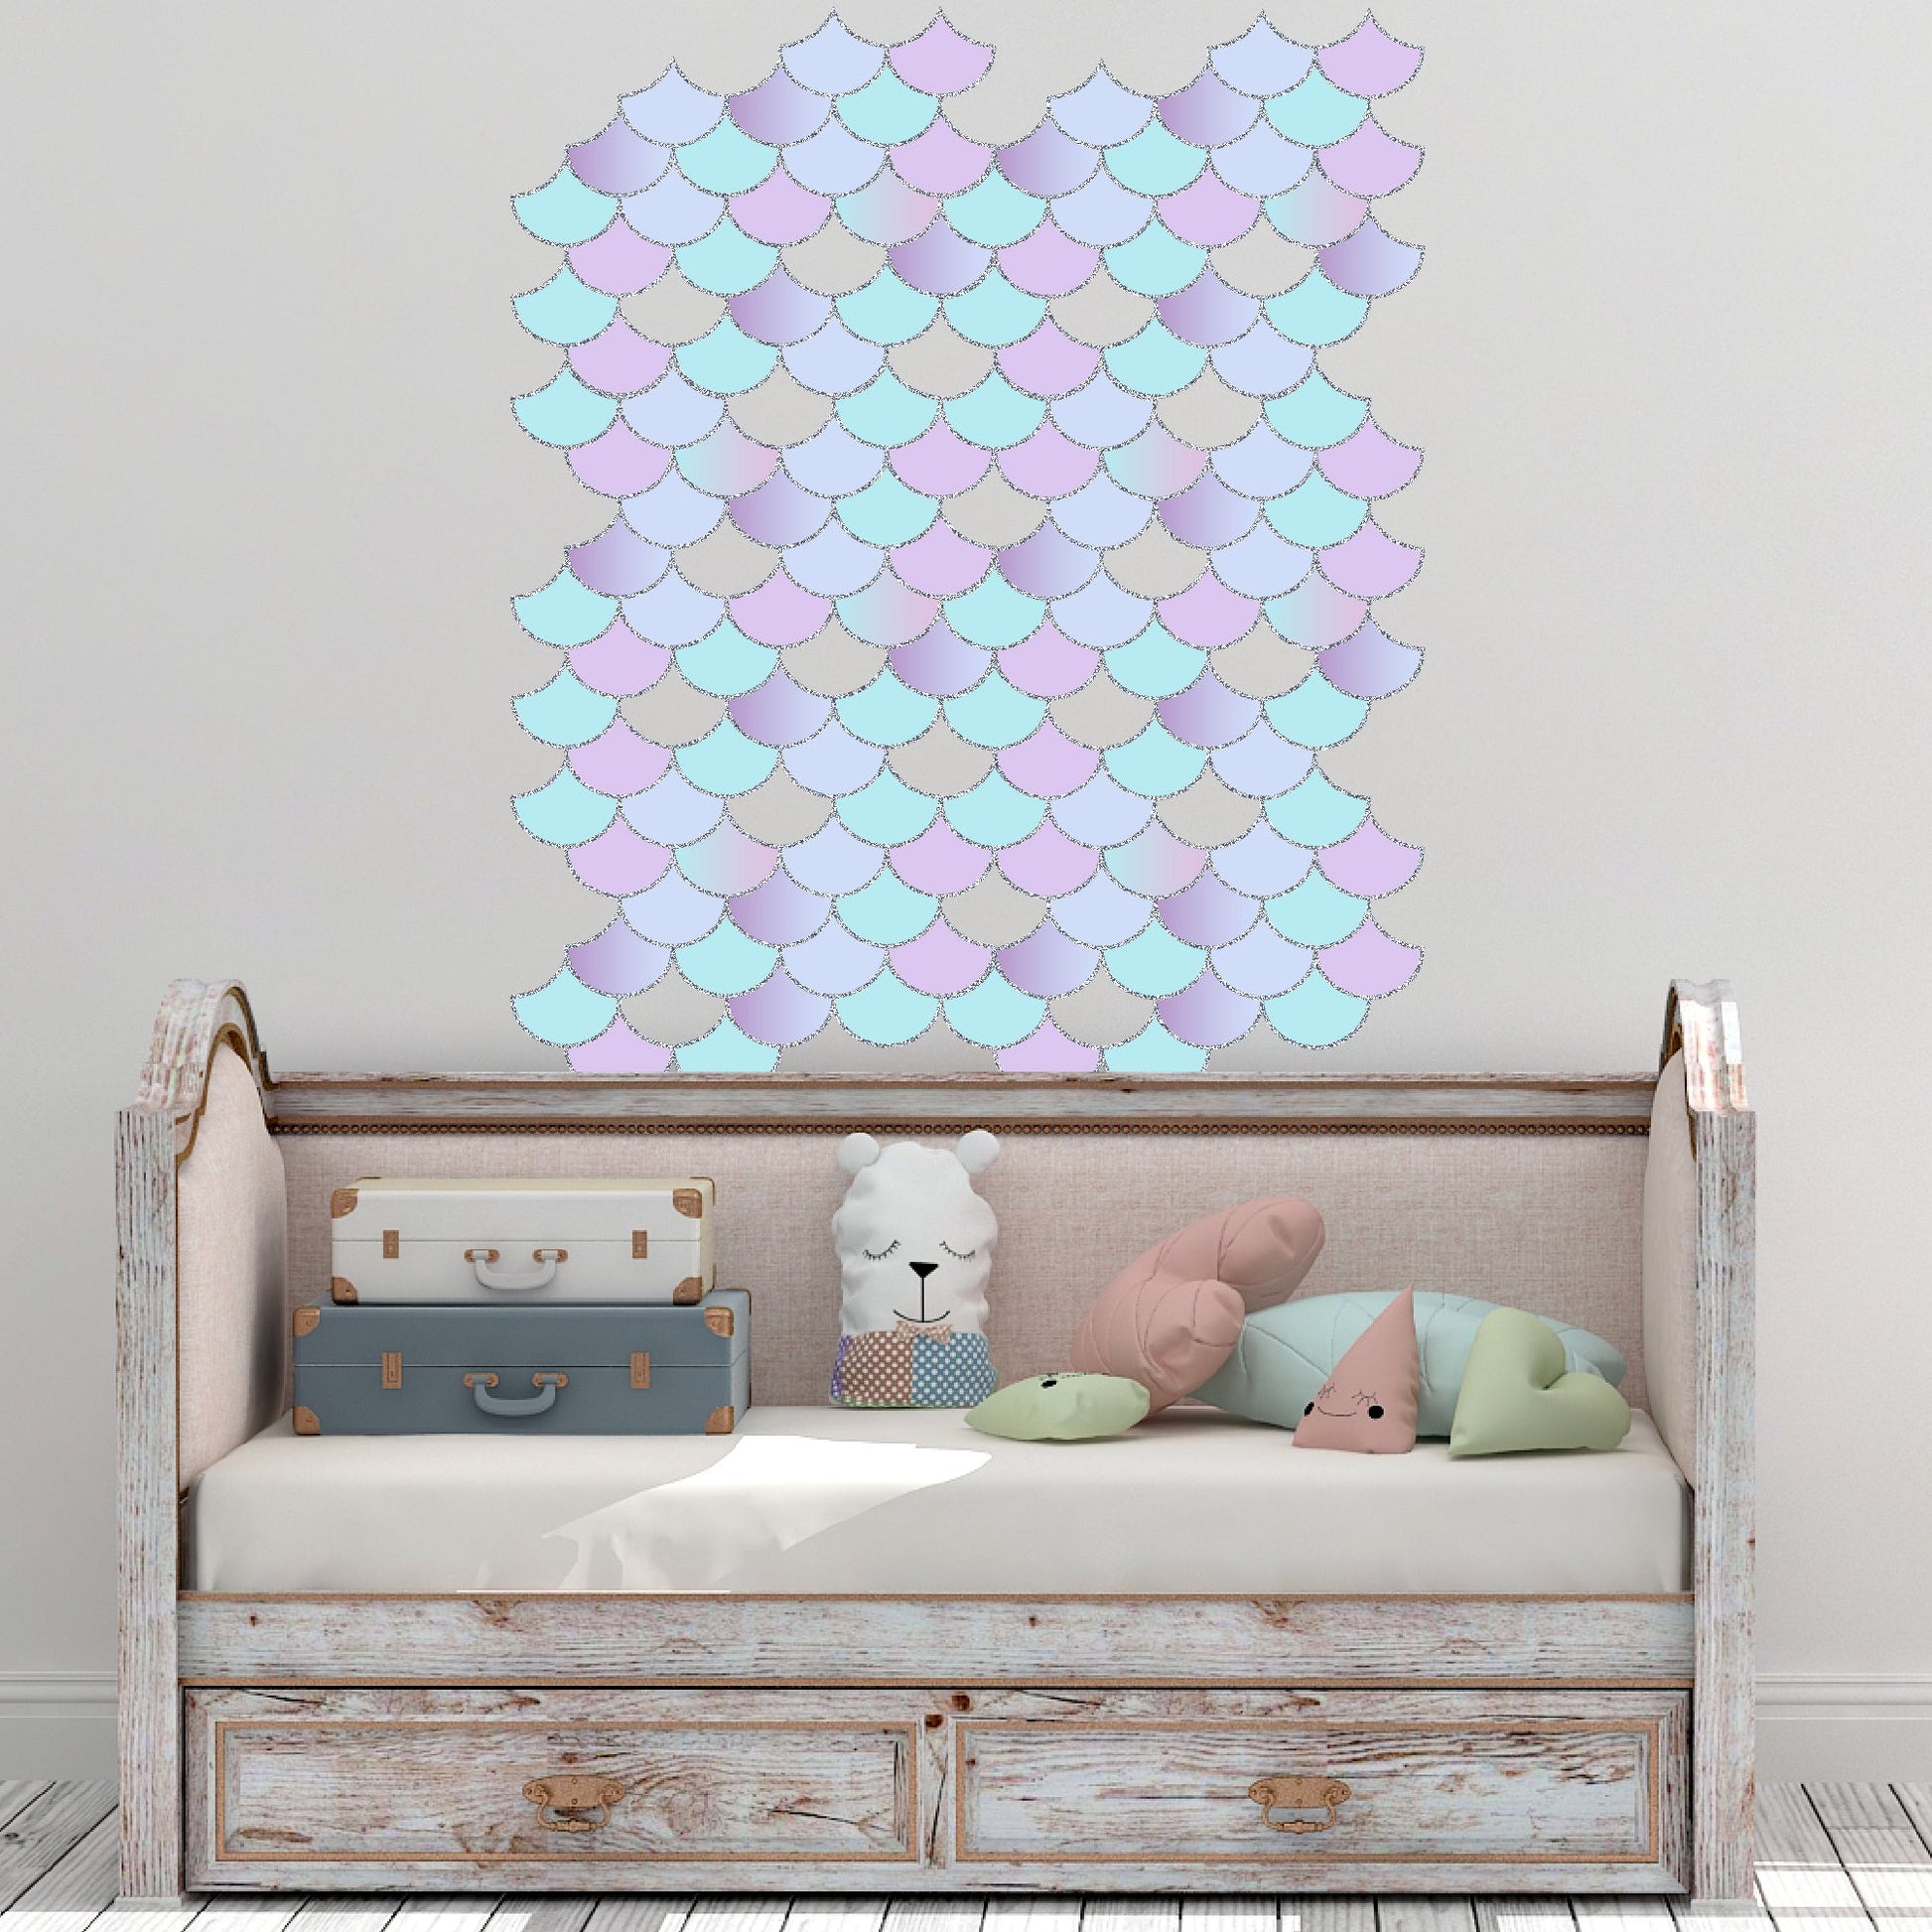 Mermaid Scales Wall Decals | Seamless Panels | Turquoise and Lavender - Picture Perfect Decals